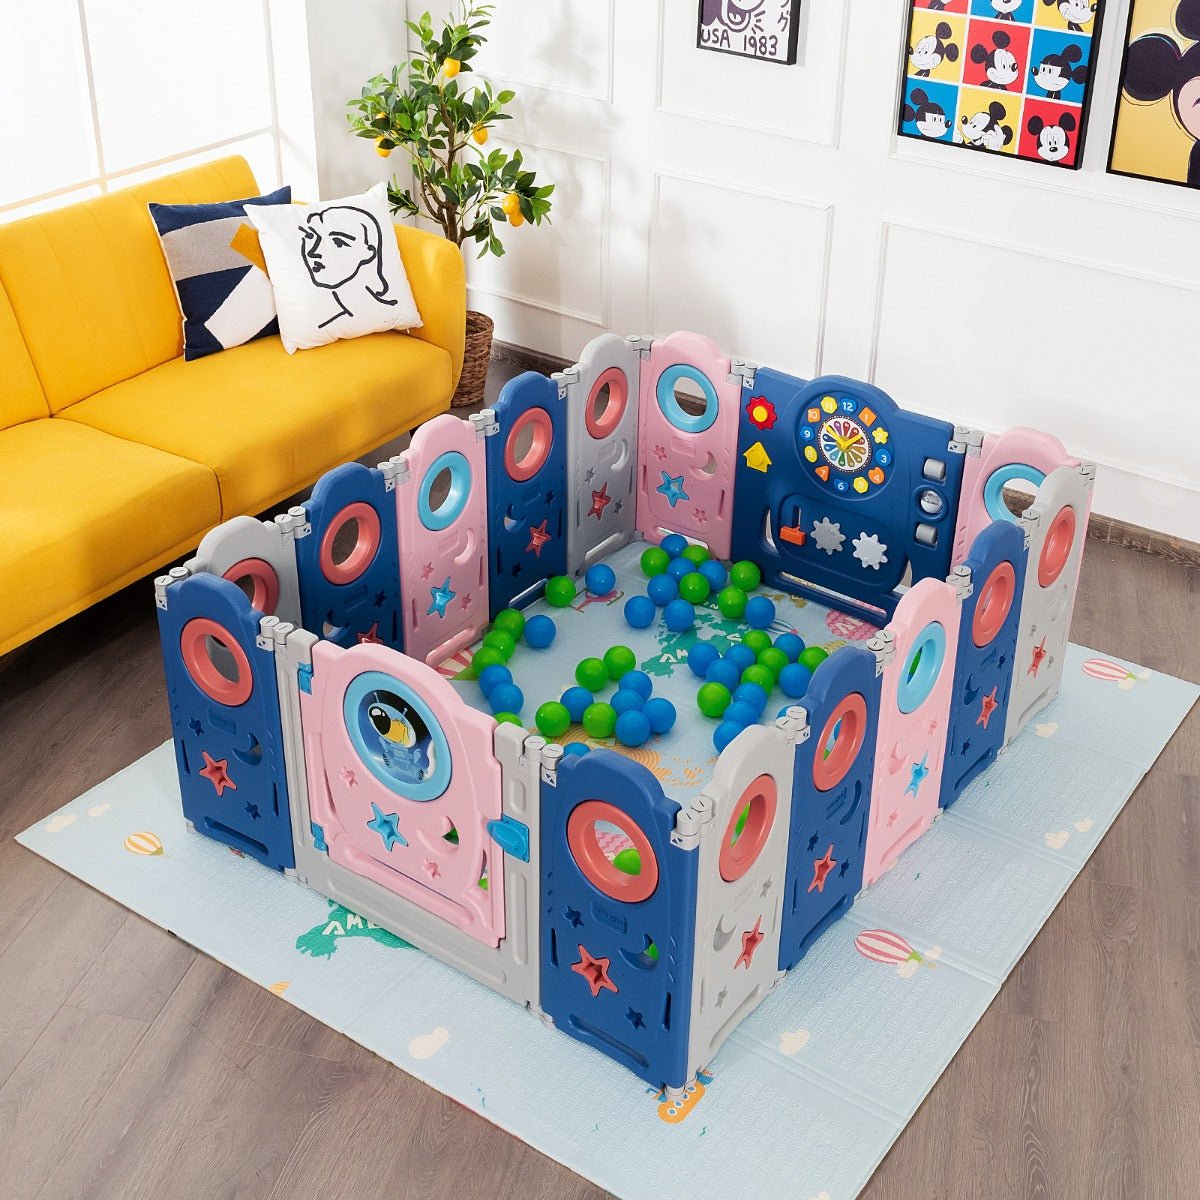 Living Room Baby Enclosure with Door Lock for Safety